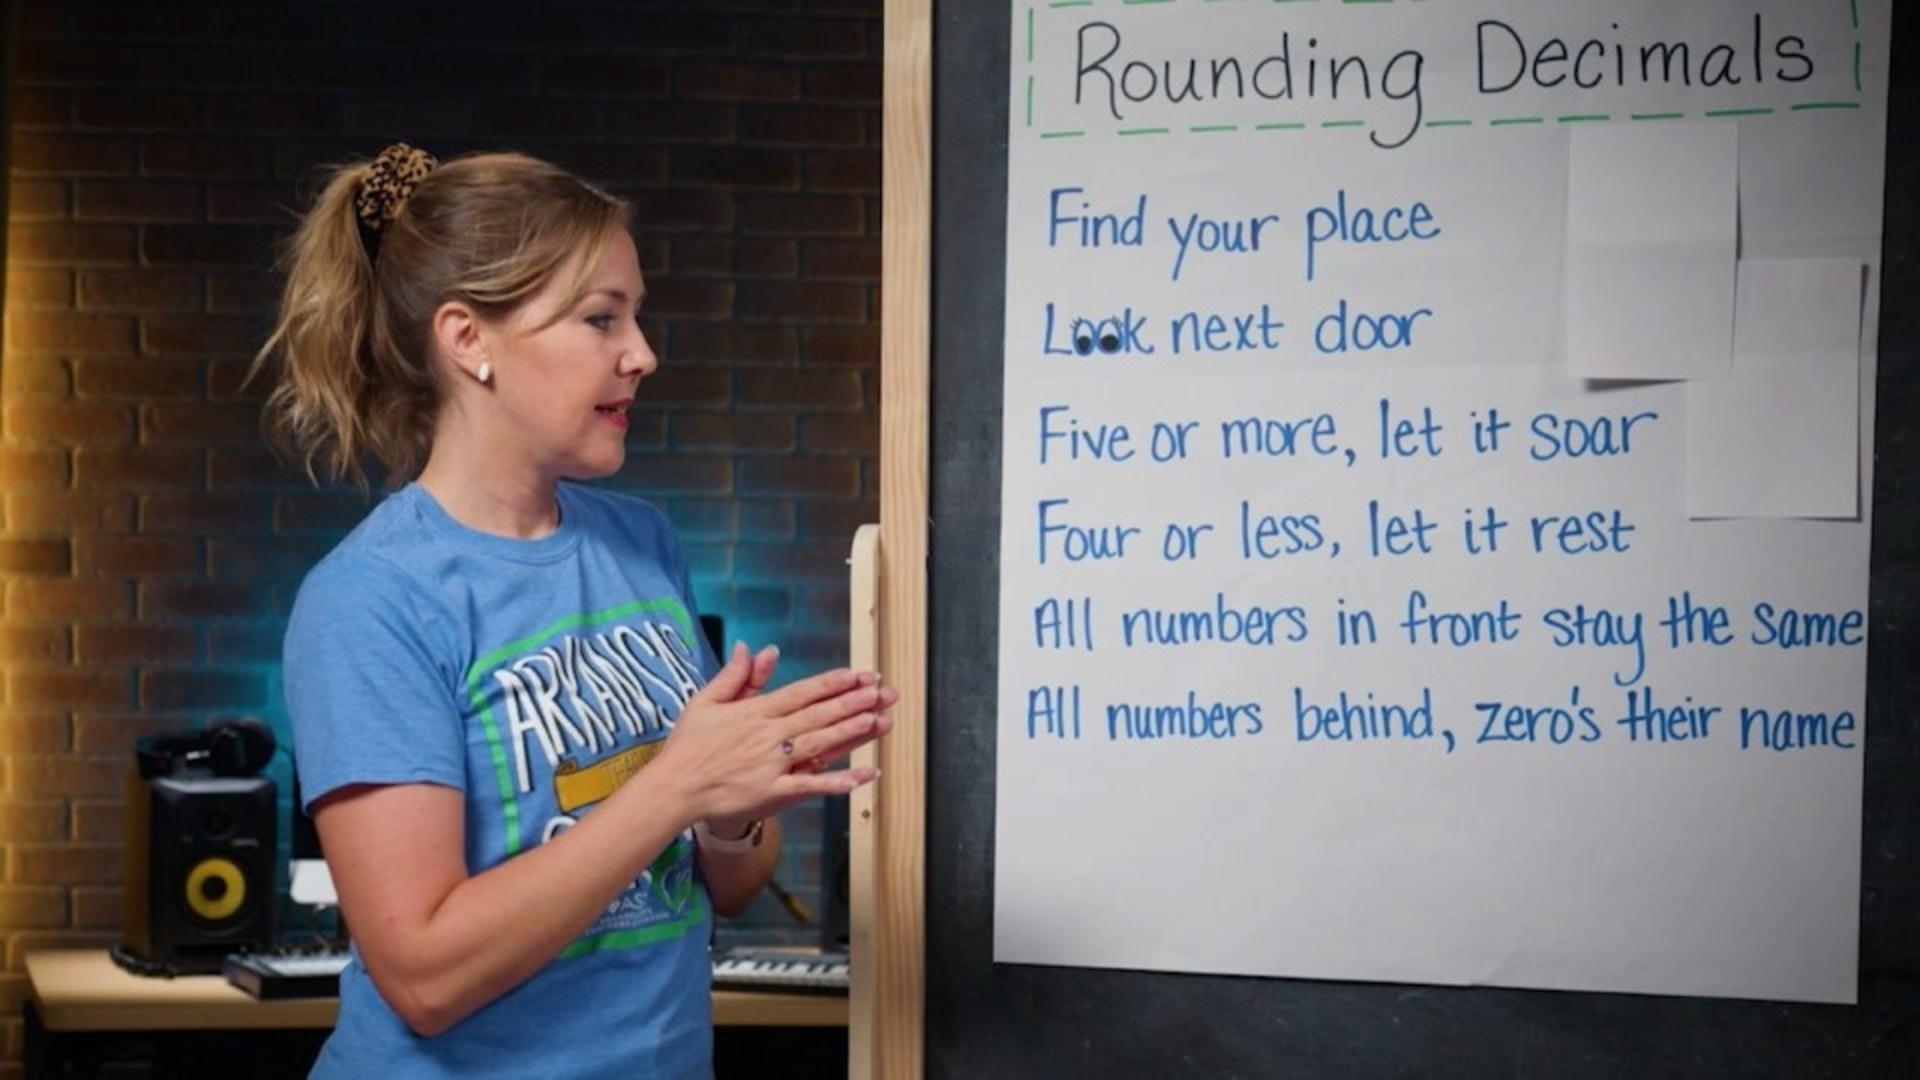 A woman in a blue shirt stands in front of a chalkboard with a giant stickie note on it.